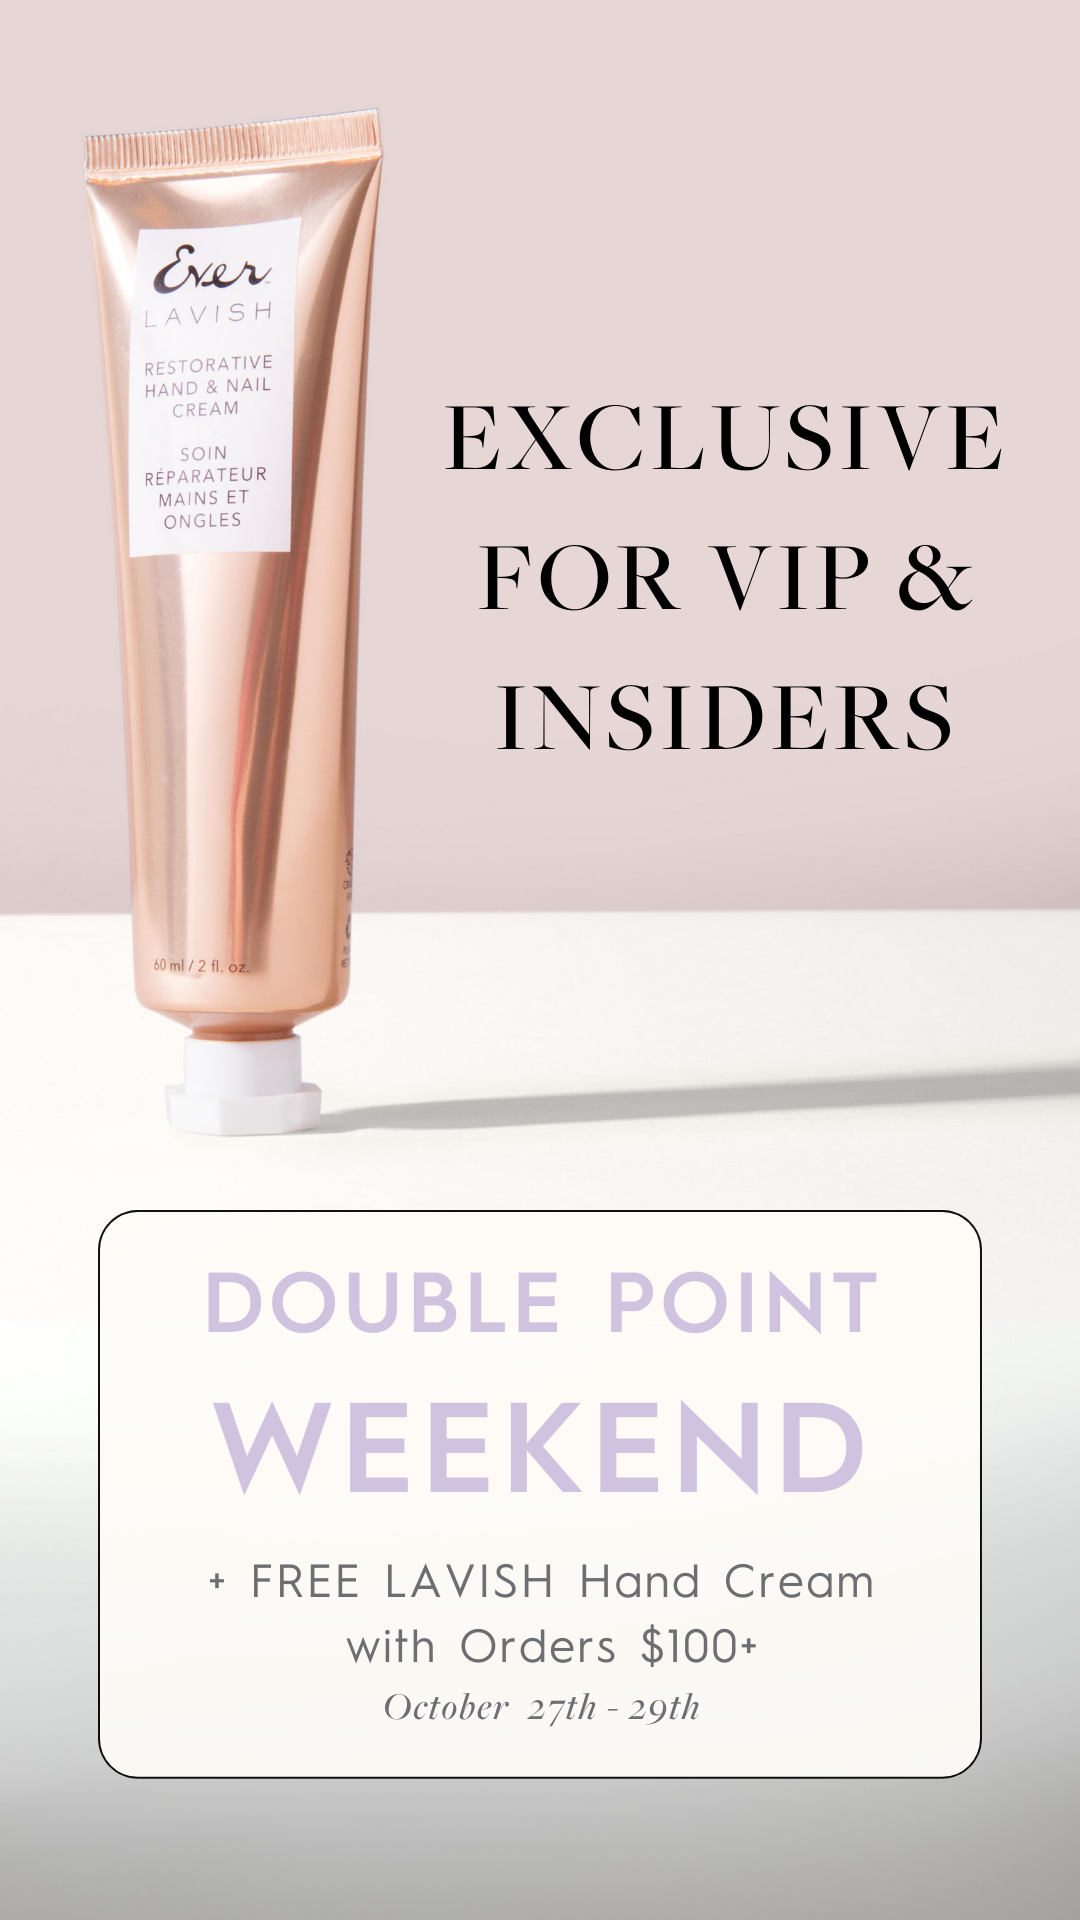 Insider & VIP Exclusive! 72 Hours Only! Double Points + Free Hand Cream.